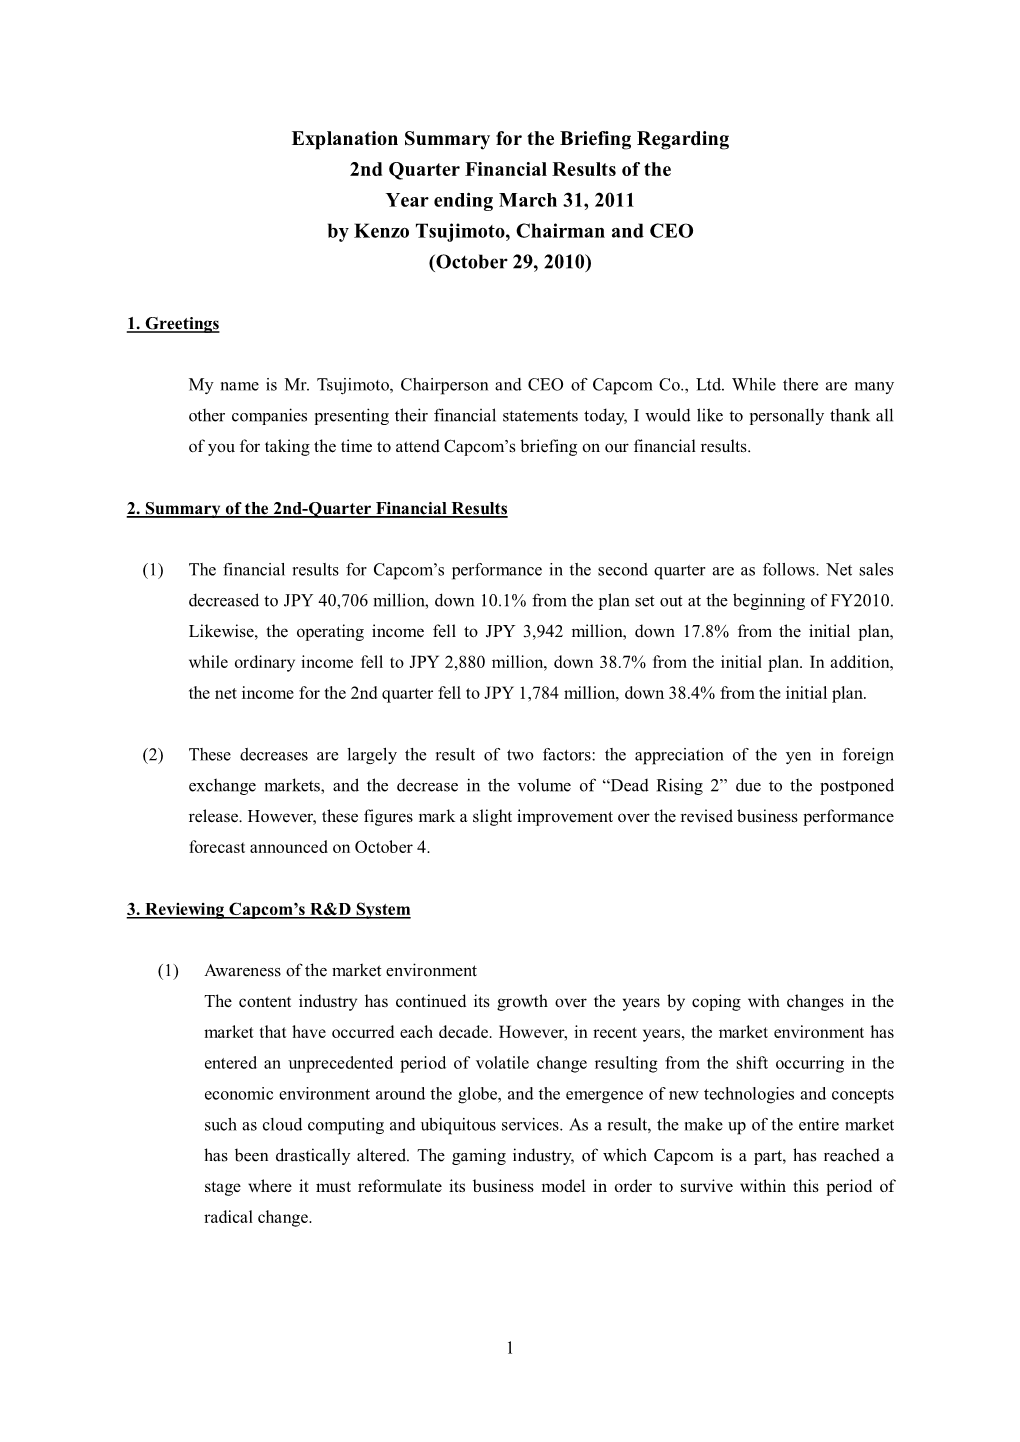 Explanation Summary for the Briefing Regarding 2Nd Quarter Financial Results of the Year Ending March 31, 2011 by Kenzo Tsujimot